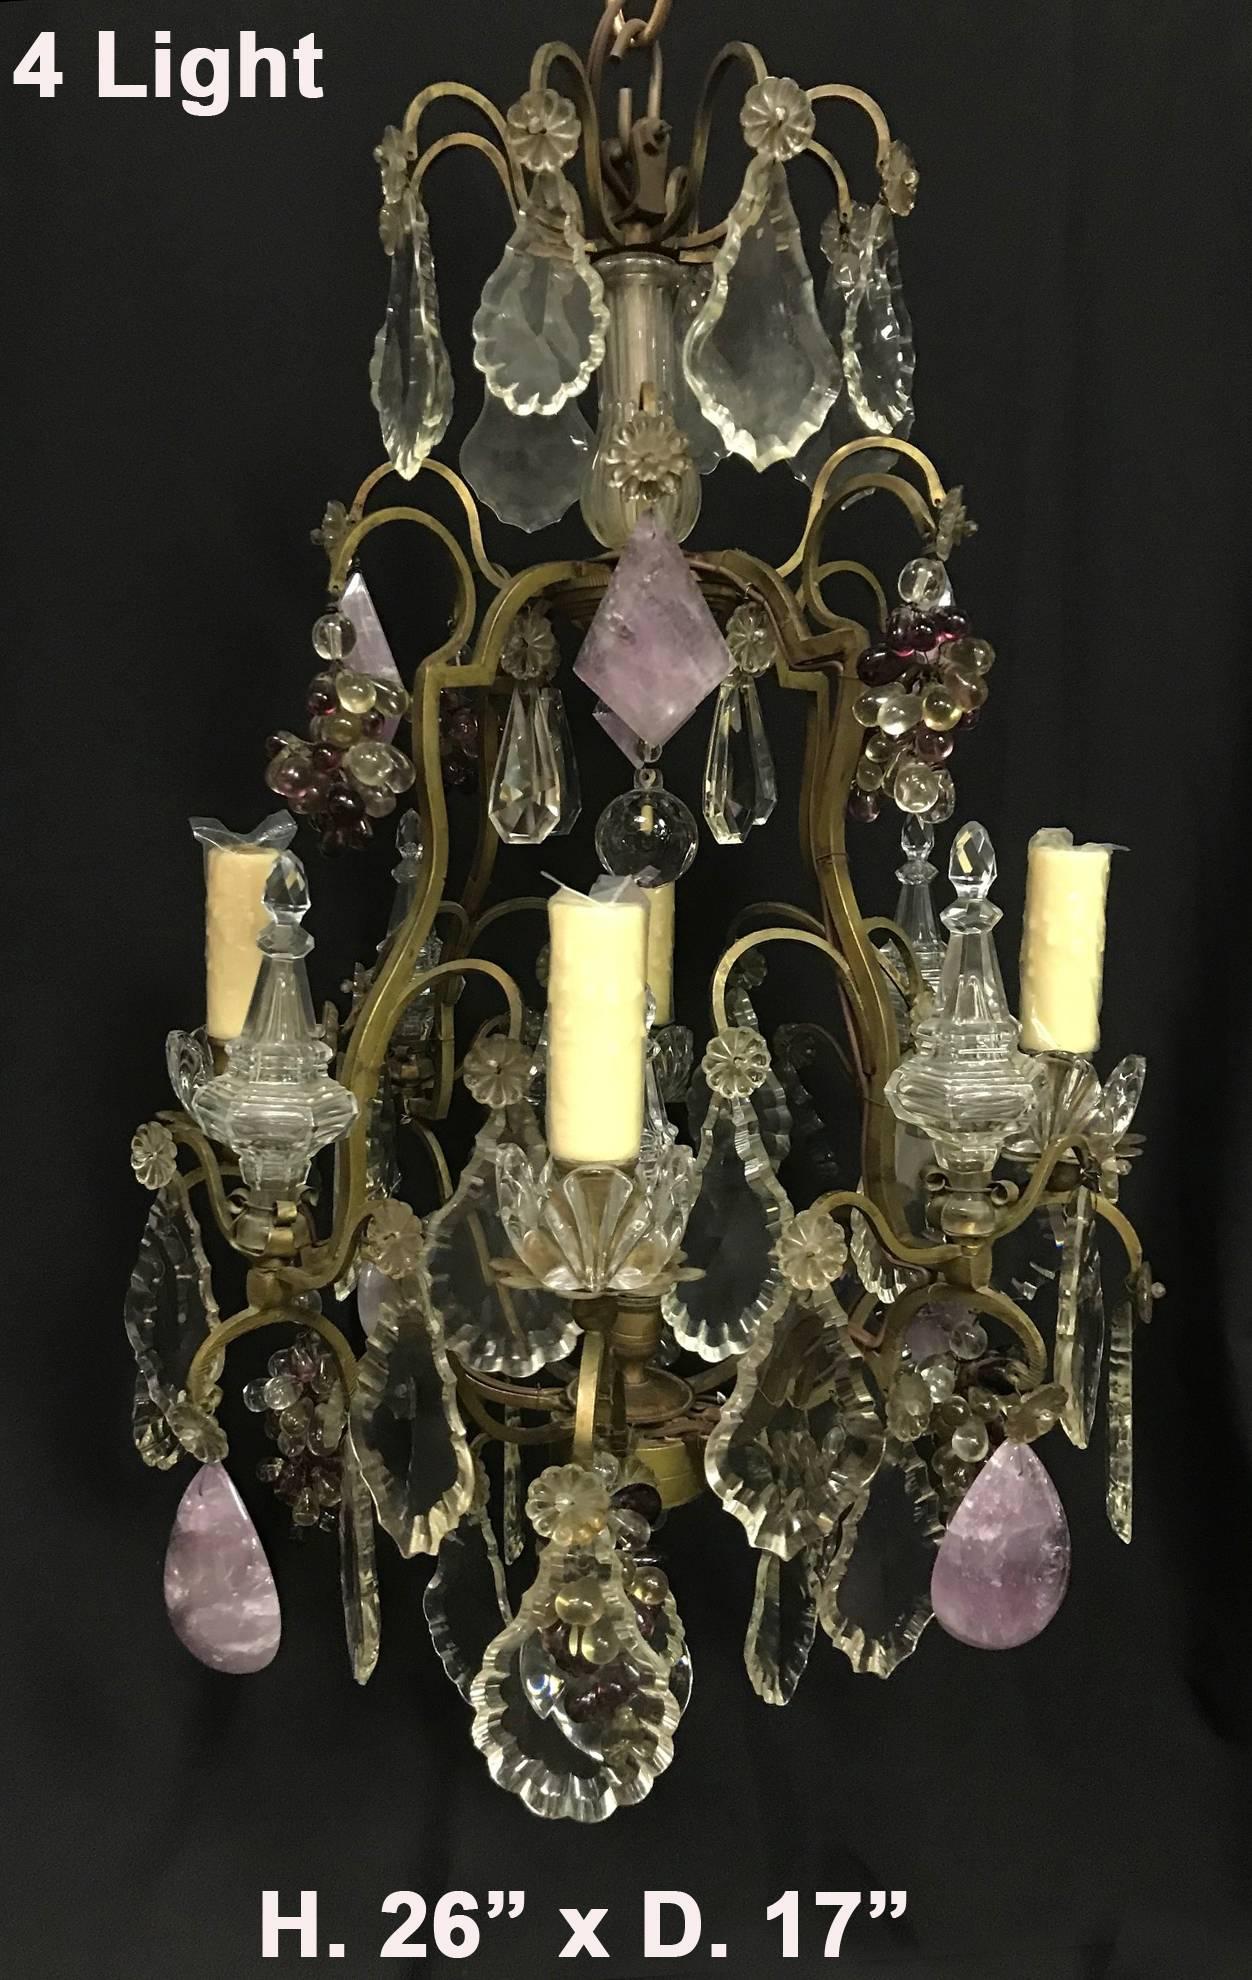 A lovely French antique Louis XV style Amethyst Quartz and cut crystal bronze four light chandelier.
Adorned with hand-carved and polished Amethyst Quartz, cut crystal, and Amethyst crystal grapes. 
Perfect for the powder room or walk-in closet.